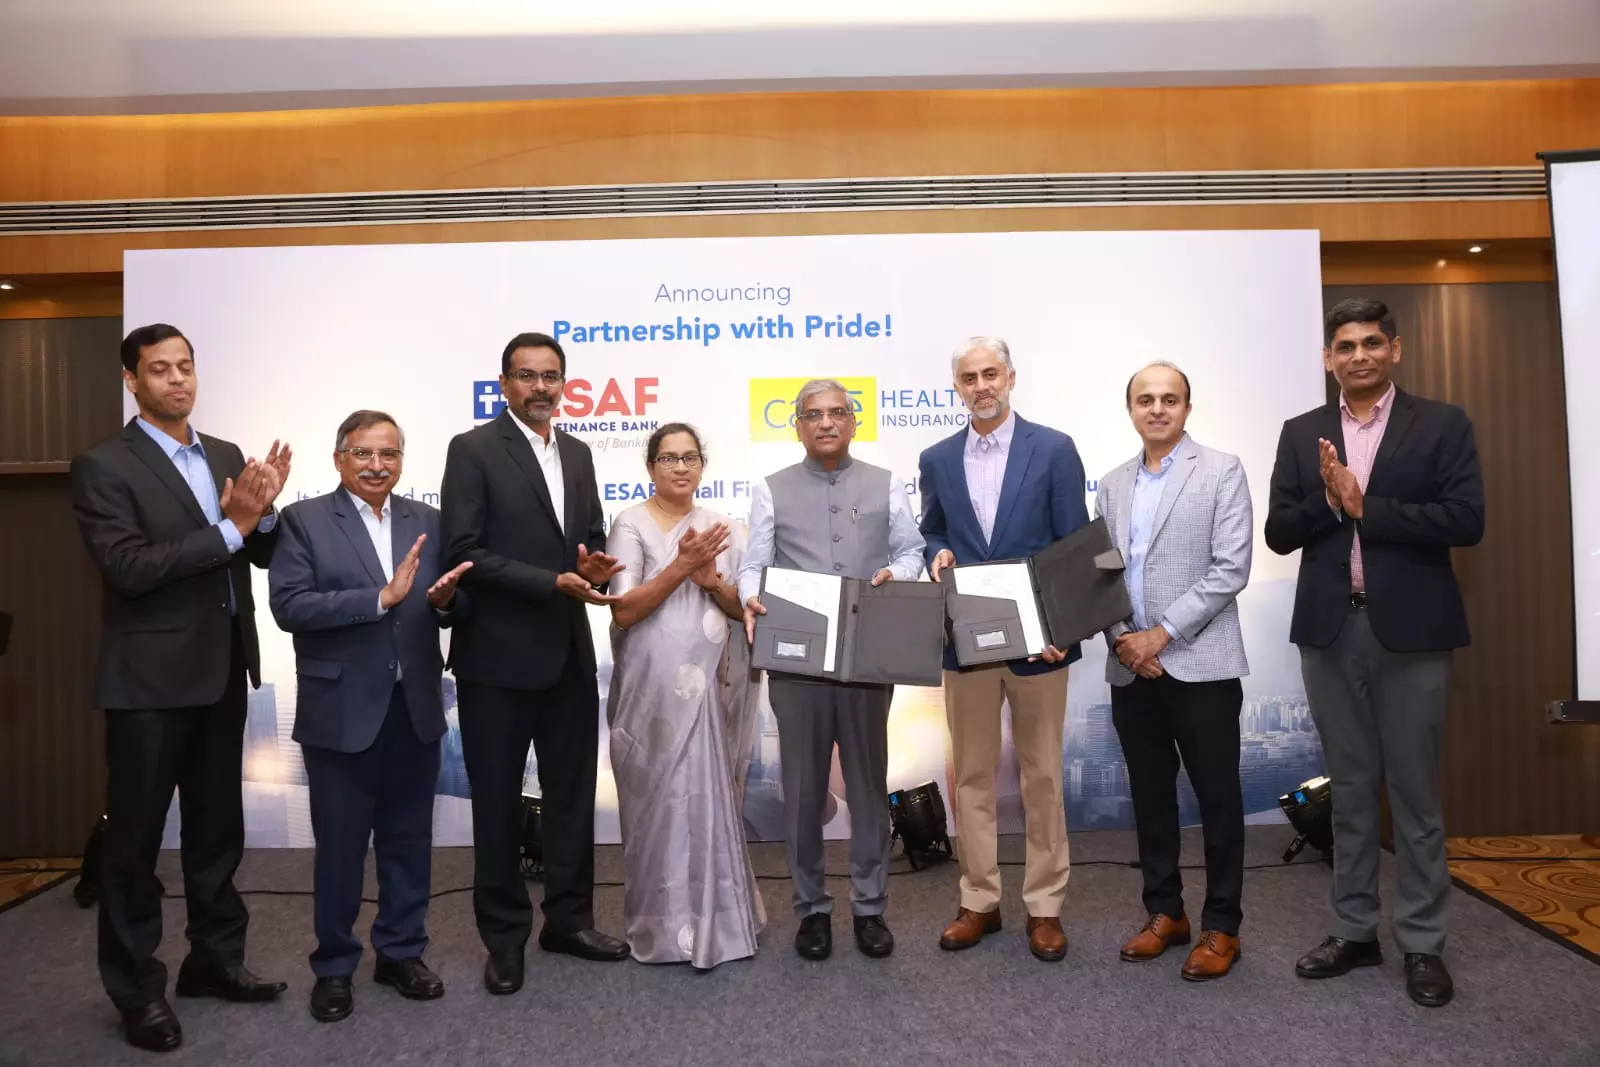 ESAF Small Finance Bank and Care Health Insurance Forge Corporate Agency Agreement